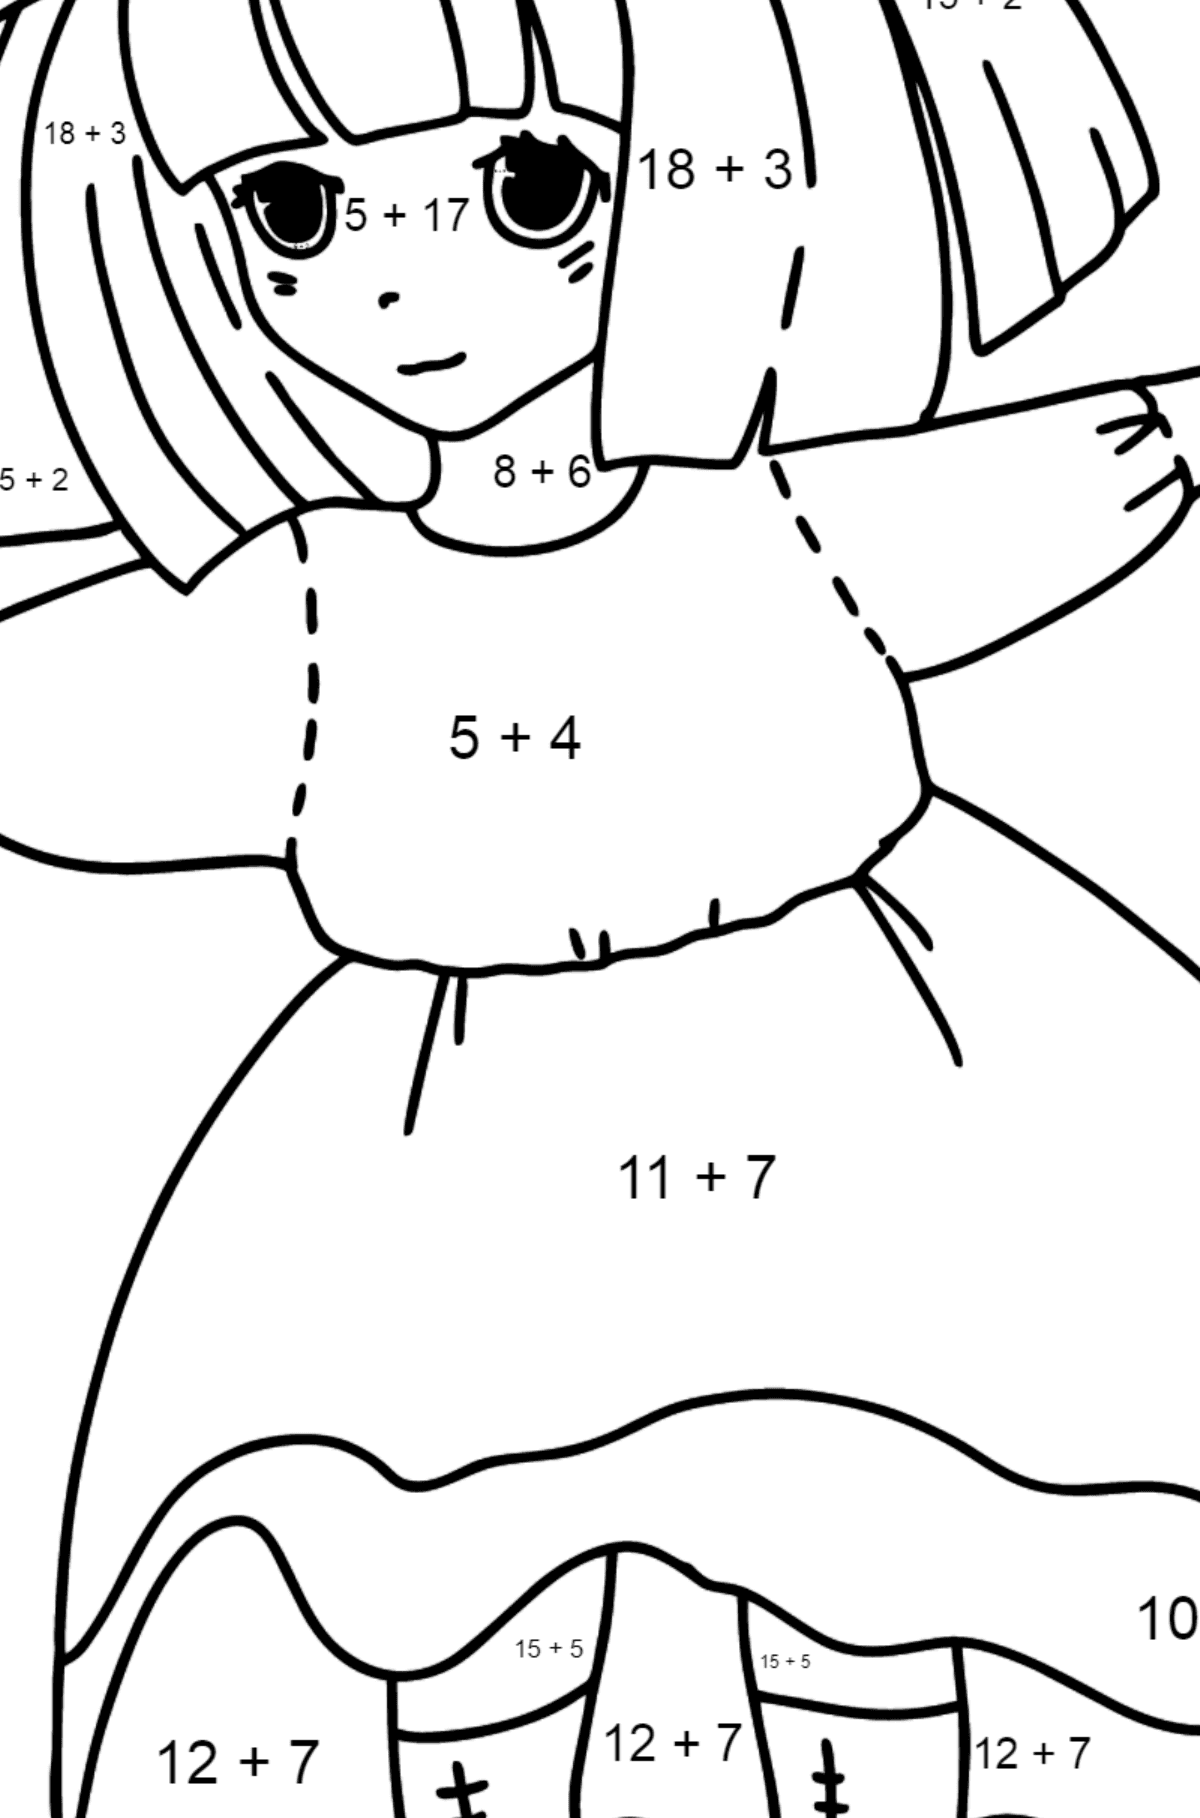 Anime Girl Dancing coloring page - Math Coloring - Addition for Kids